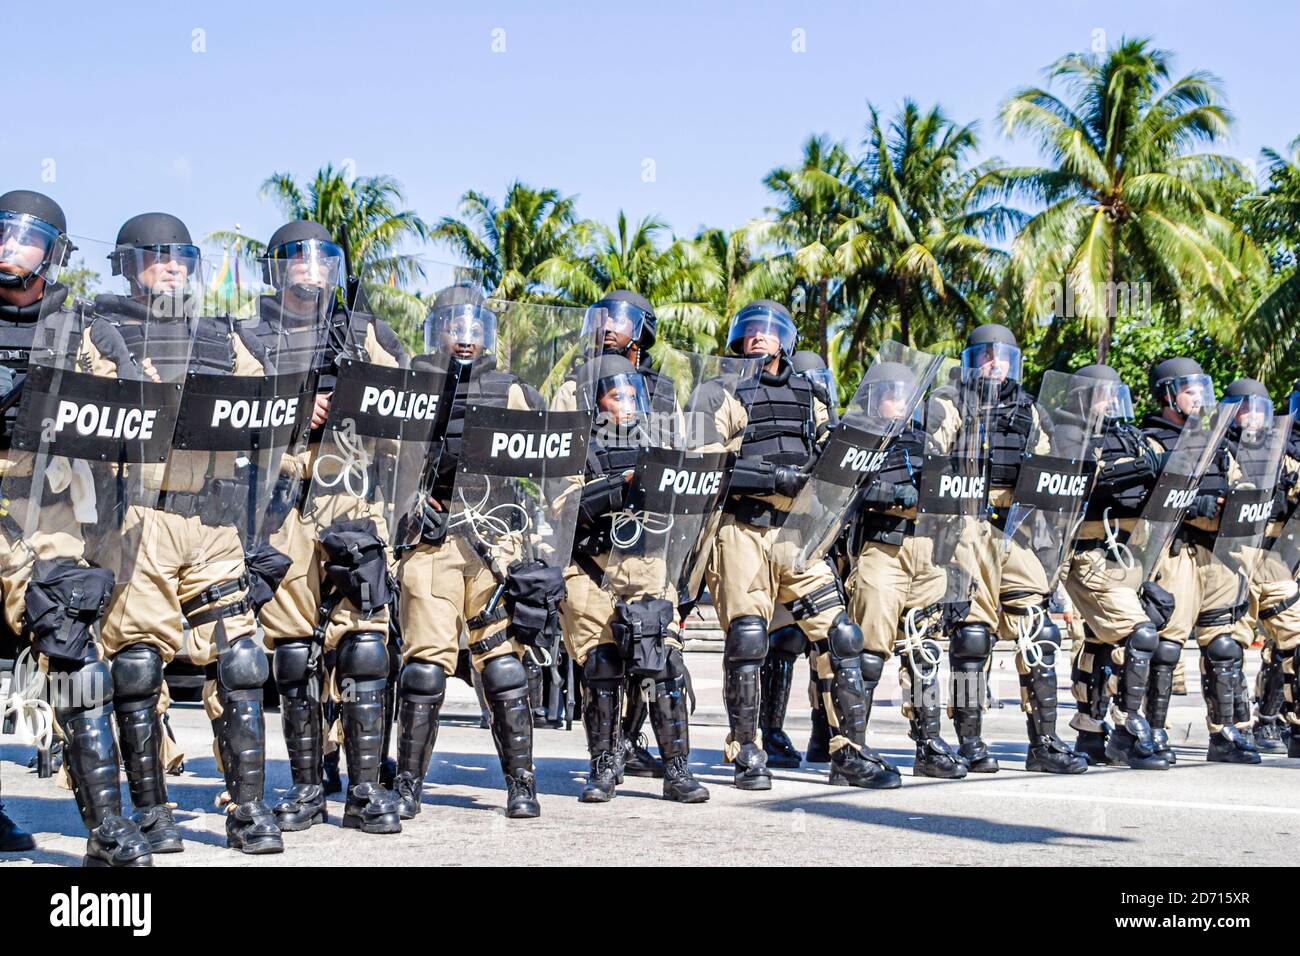 Miami Florida,Biscayne Boulevard,Free Trade Area of Americans Summit FTAA demonstrations,police policemen riot gear shields, Stock Photo